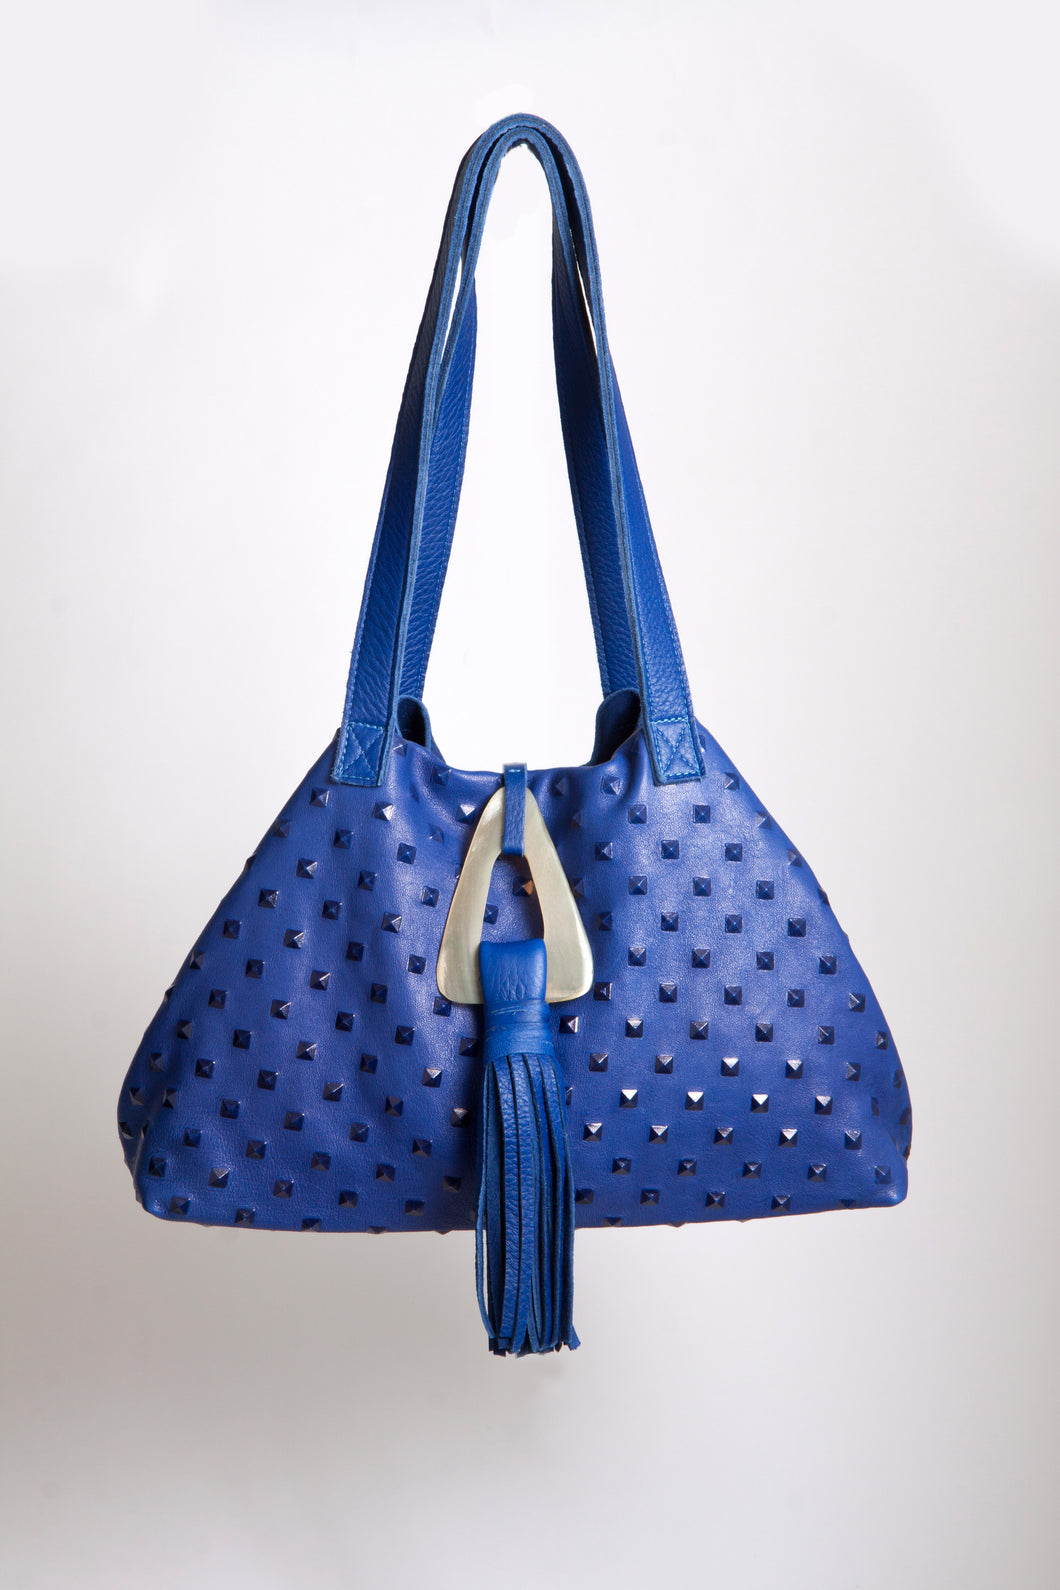 <b>Stacie</b><br> <p><font size=“3px”> Cobalt Pyramid Tote With Horn Tassel</font></p>